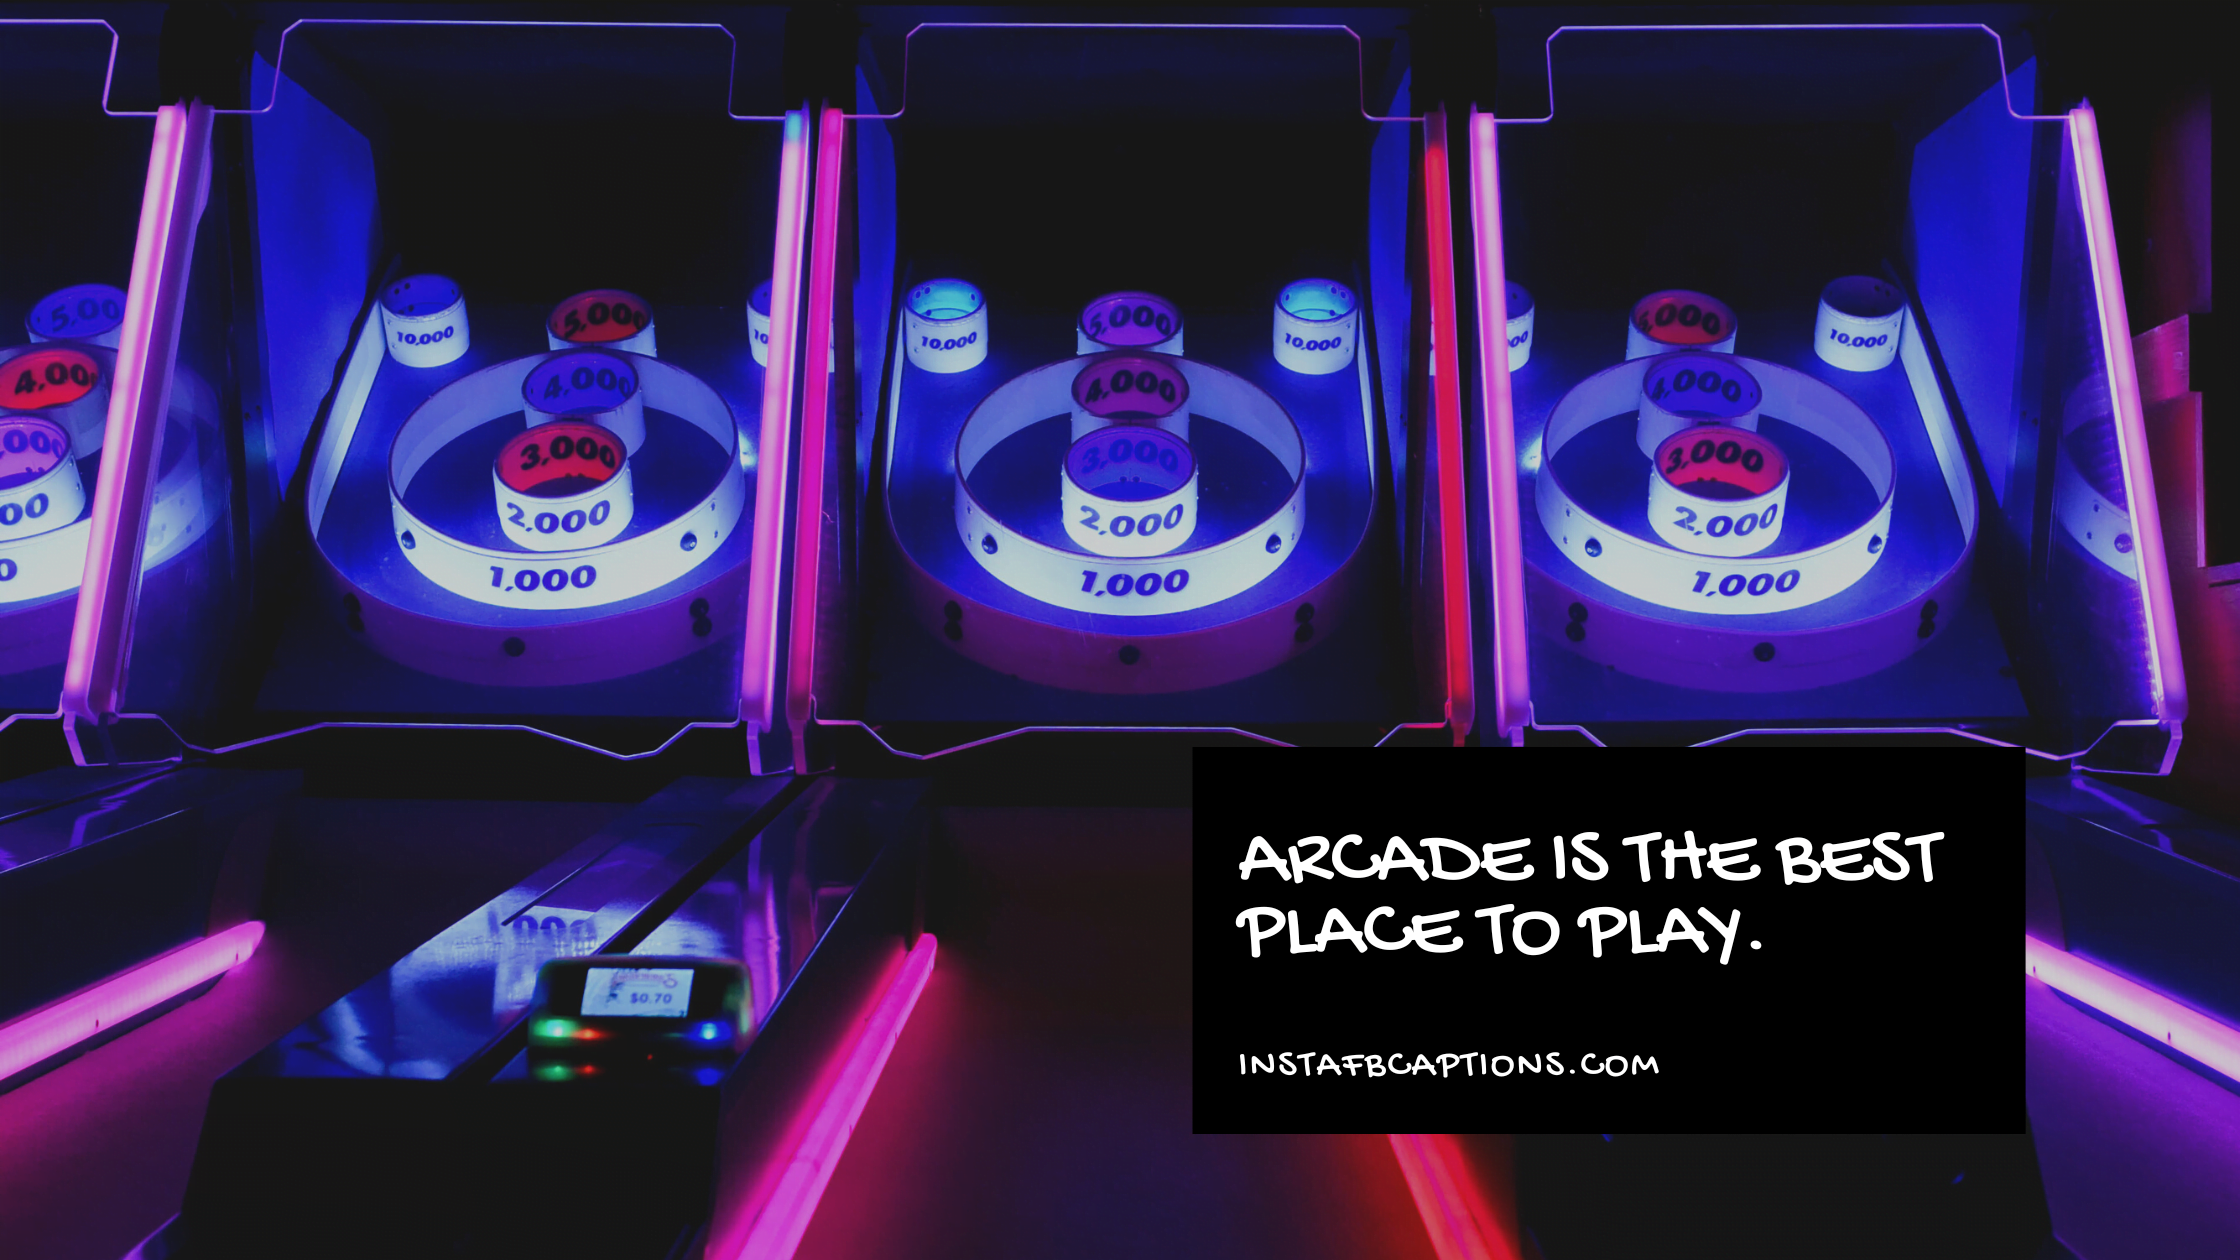 Arcade is the best place to play.  - Aesthetic Arcade Captions - Unleashing Your Inner Gamer with Captivating Arcade Instagram Captions